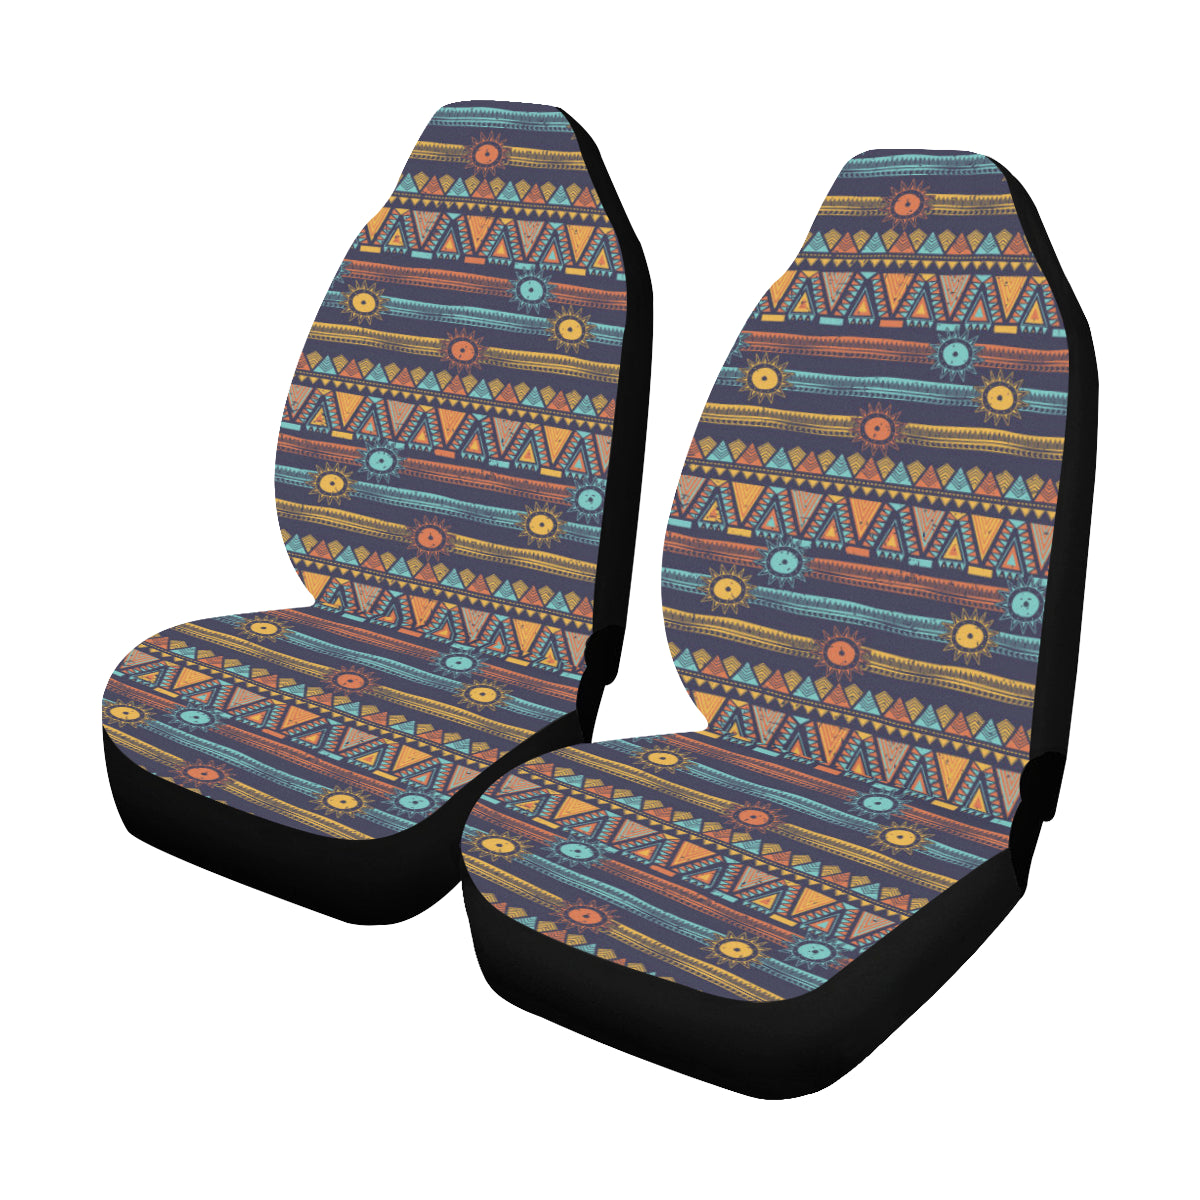 Aztec Pattern Car Front Seat Covers  2pcs, Ethnic Tribal Maya Mexican Art Bohemian Art Auto Vehicle SUV Protector Accessory Decoration Starcove Fashion